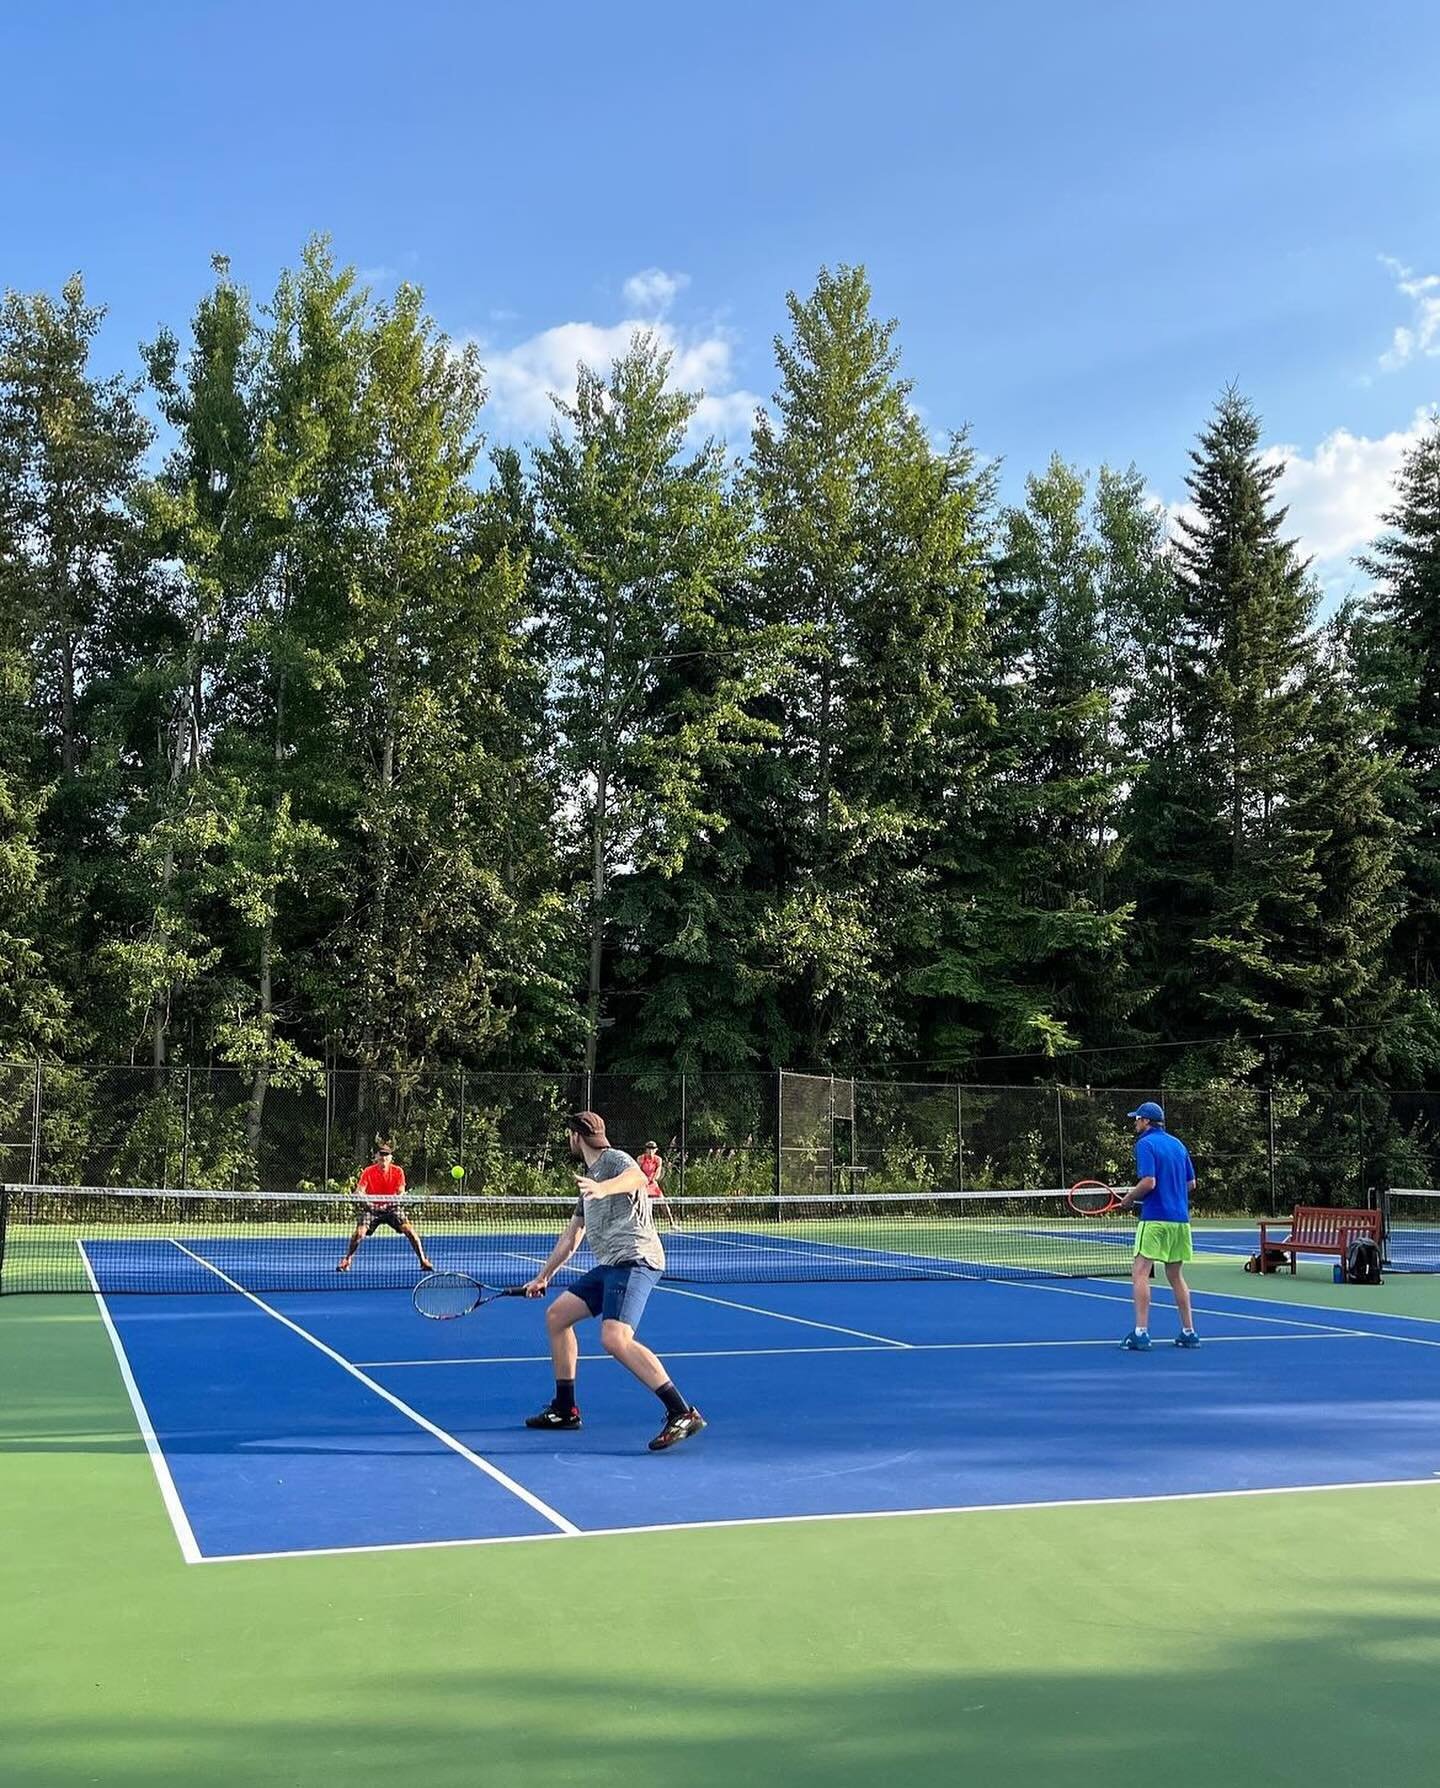 With summer fast approaching, our team power washed our outdoor tennis + pickleball courts on Thursday!!🫧💦

Now we just need some sunshine! Until then we&rsquo;ll have to cast our minds back to some of our favourite blue sky days on court . . . 🌞